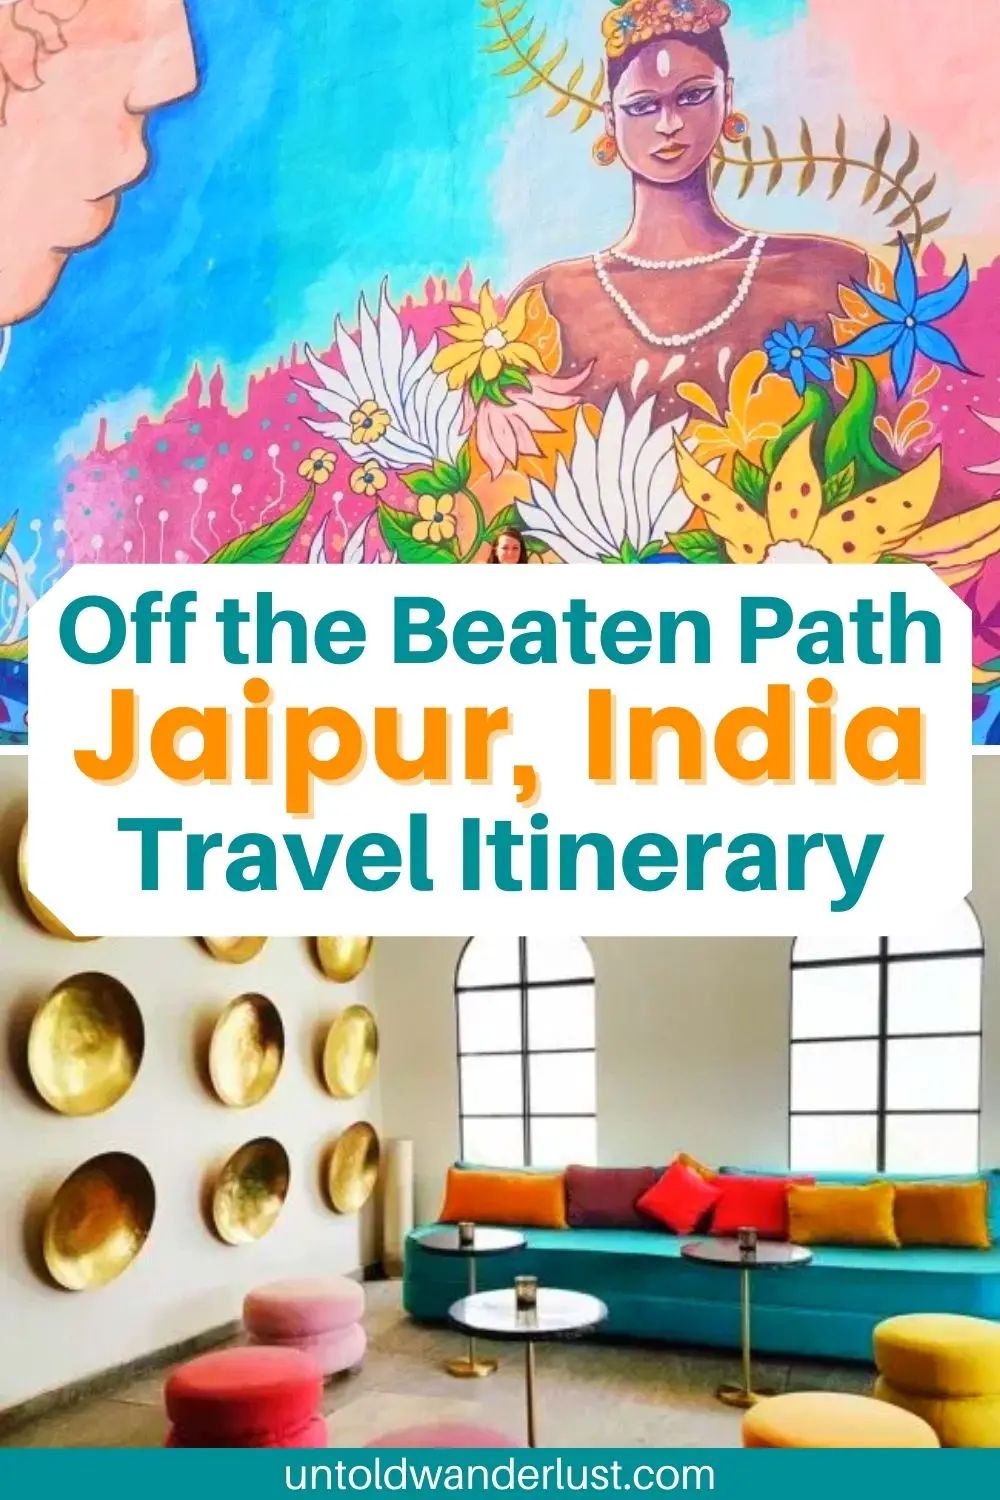 Off the Beaten Path in Jaipr, India Travel Itinerary